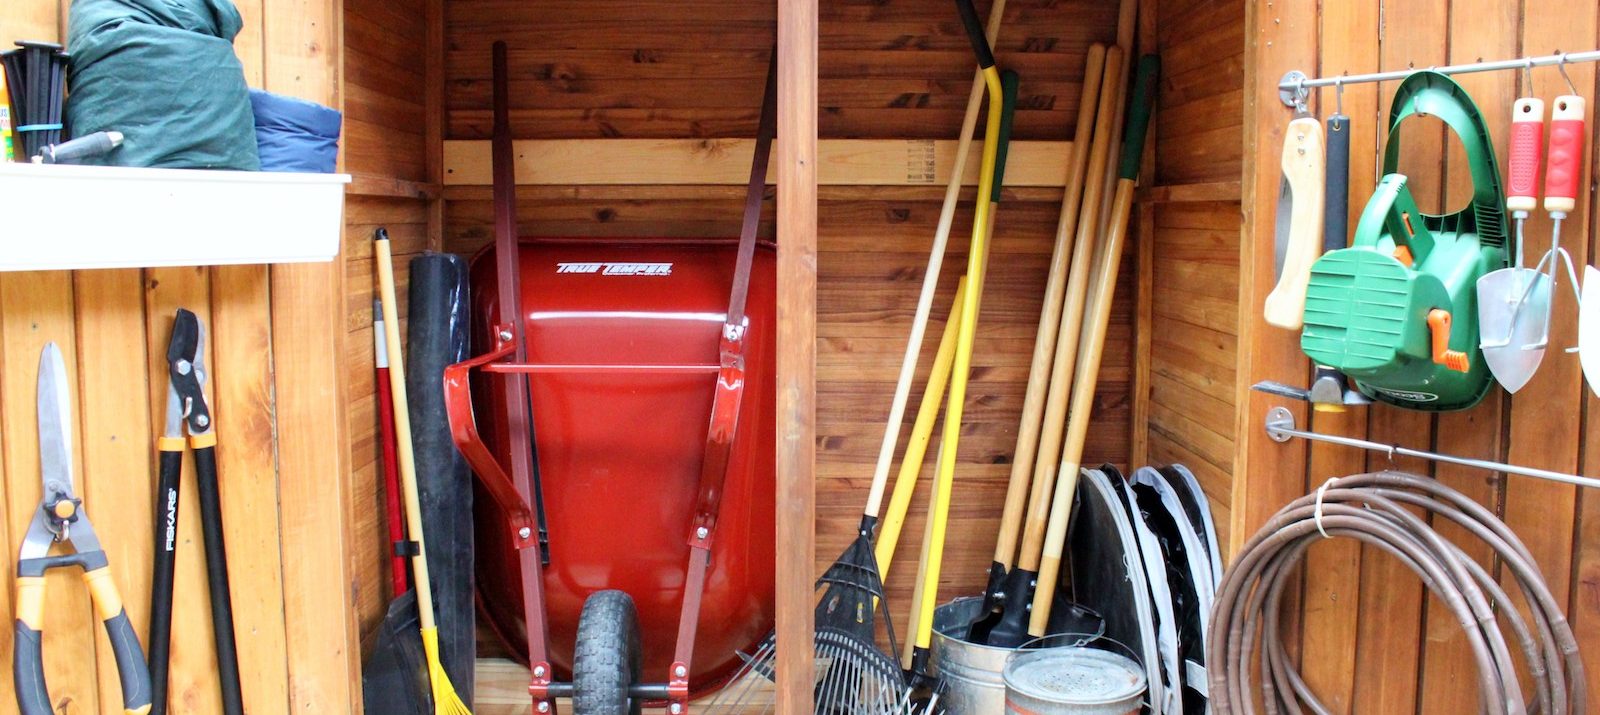 backyard storage ideas, tips, hacks, and solutions